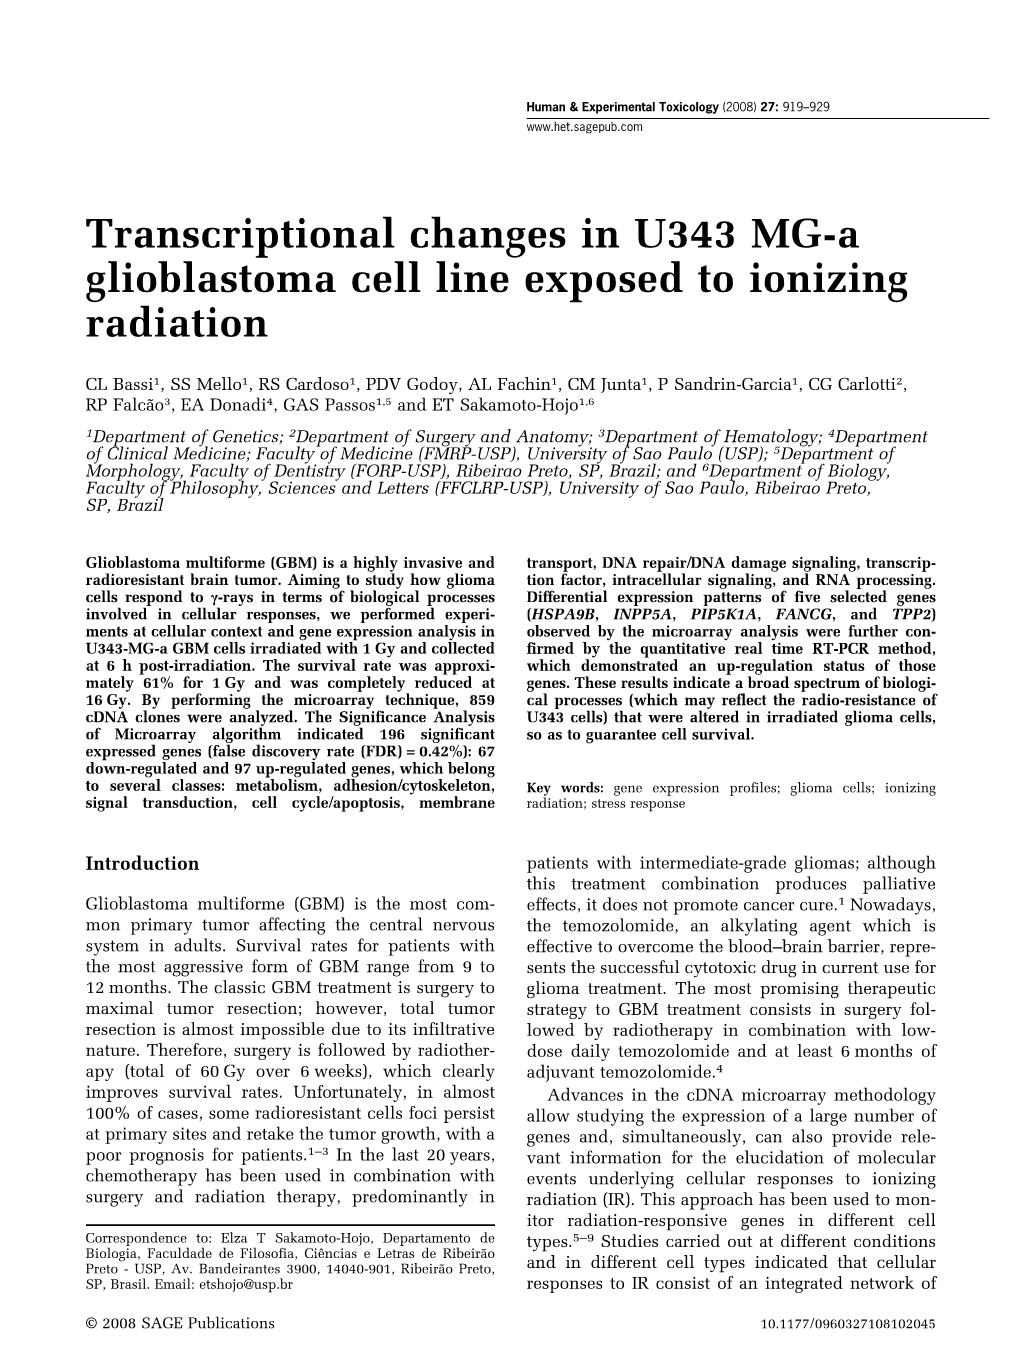 Transcriptional Changes in U343 MG-A Glioblastoma Cell Line Exposed to Ionizing Radiation